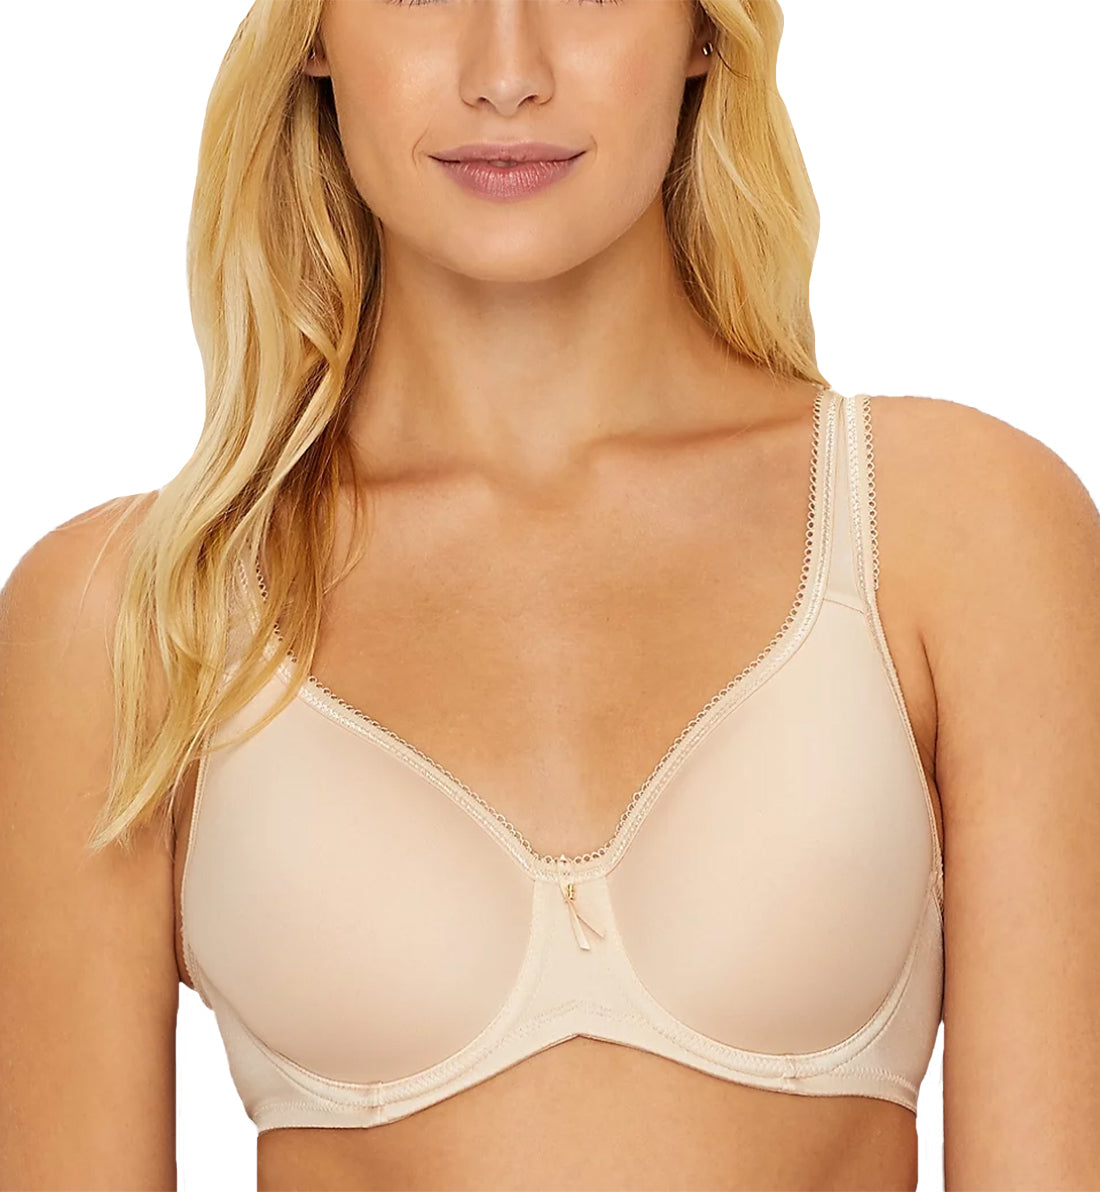 Wacoal Basic Beauty Spacer Underwire T-Shirt Bra (853192),30D,Natural Nude - Natural Nude,30D